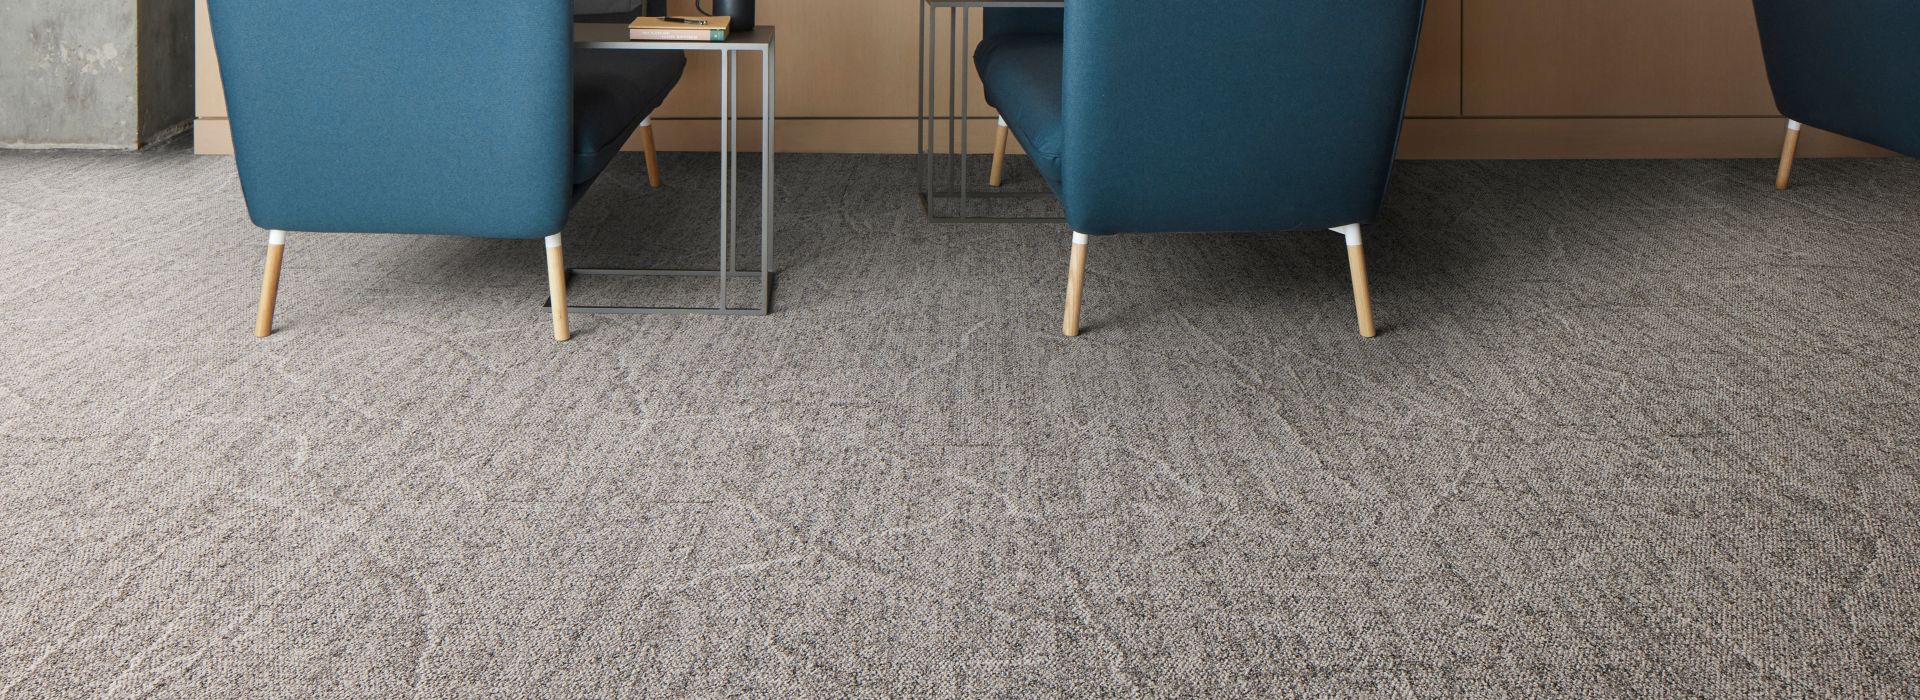 Interface Keys View carpet tile in casual seating area